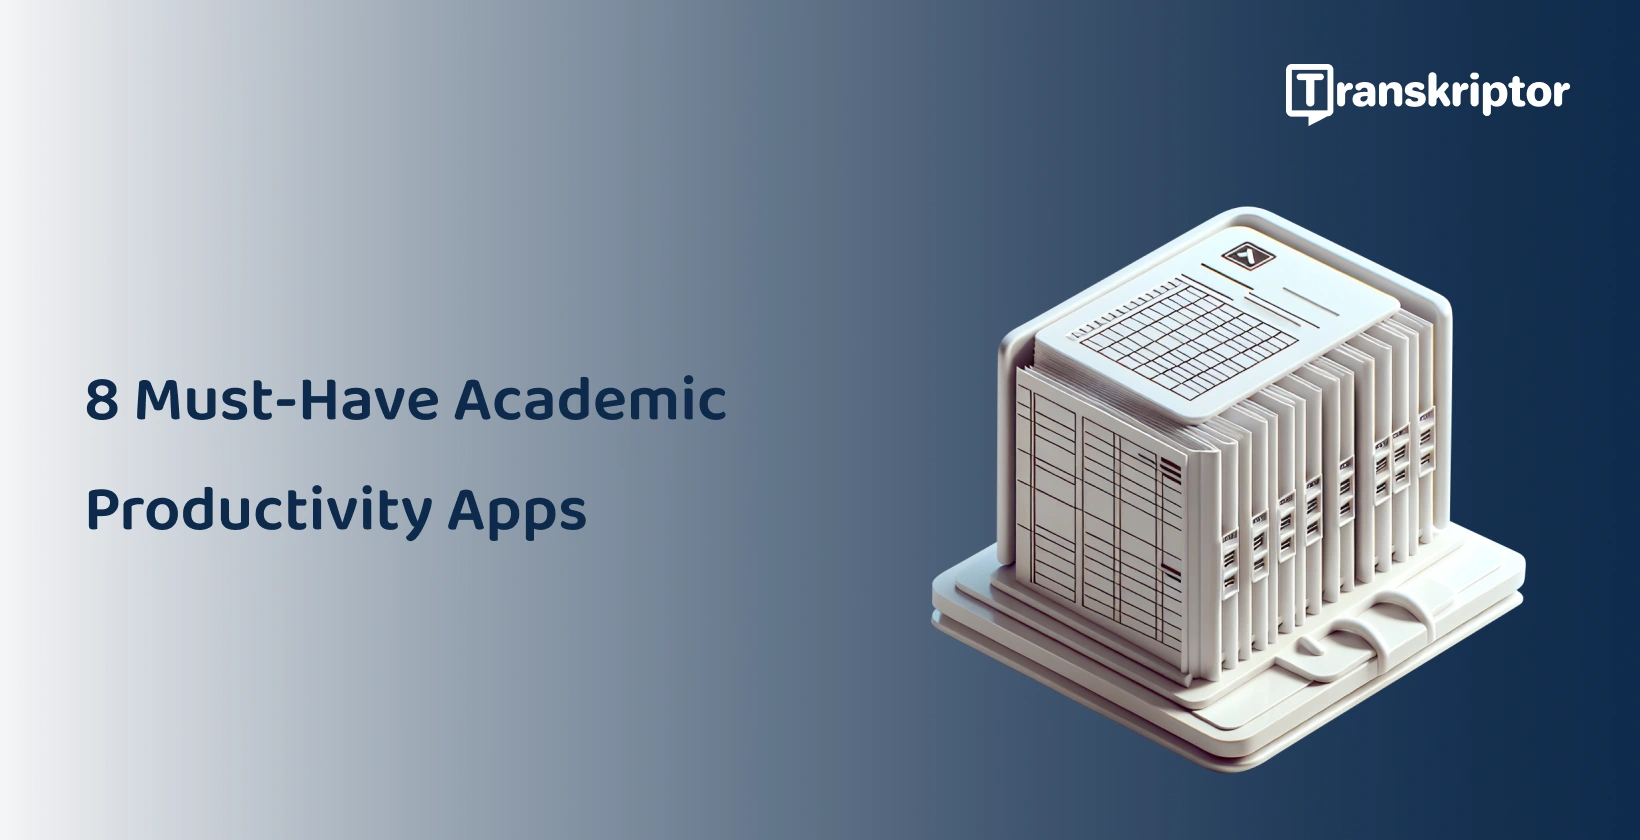 Academic productivity apps displayed on a digital screen for efficient task management.